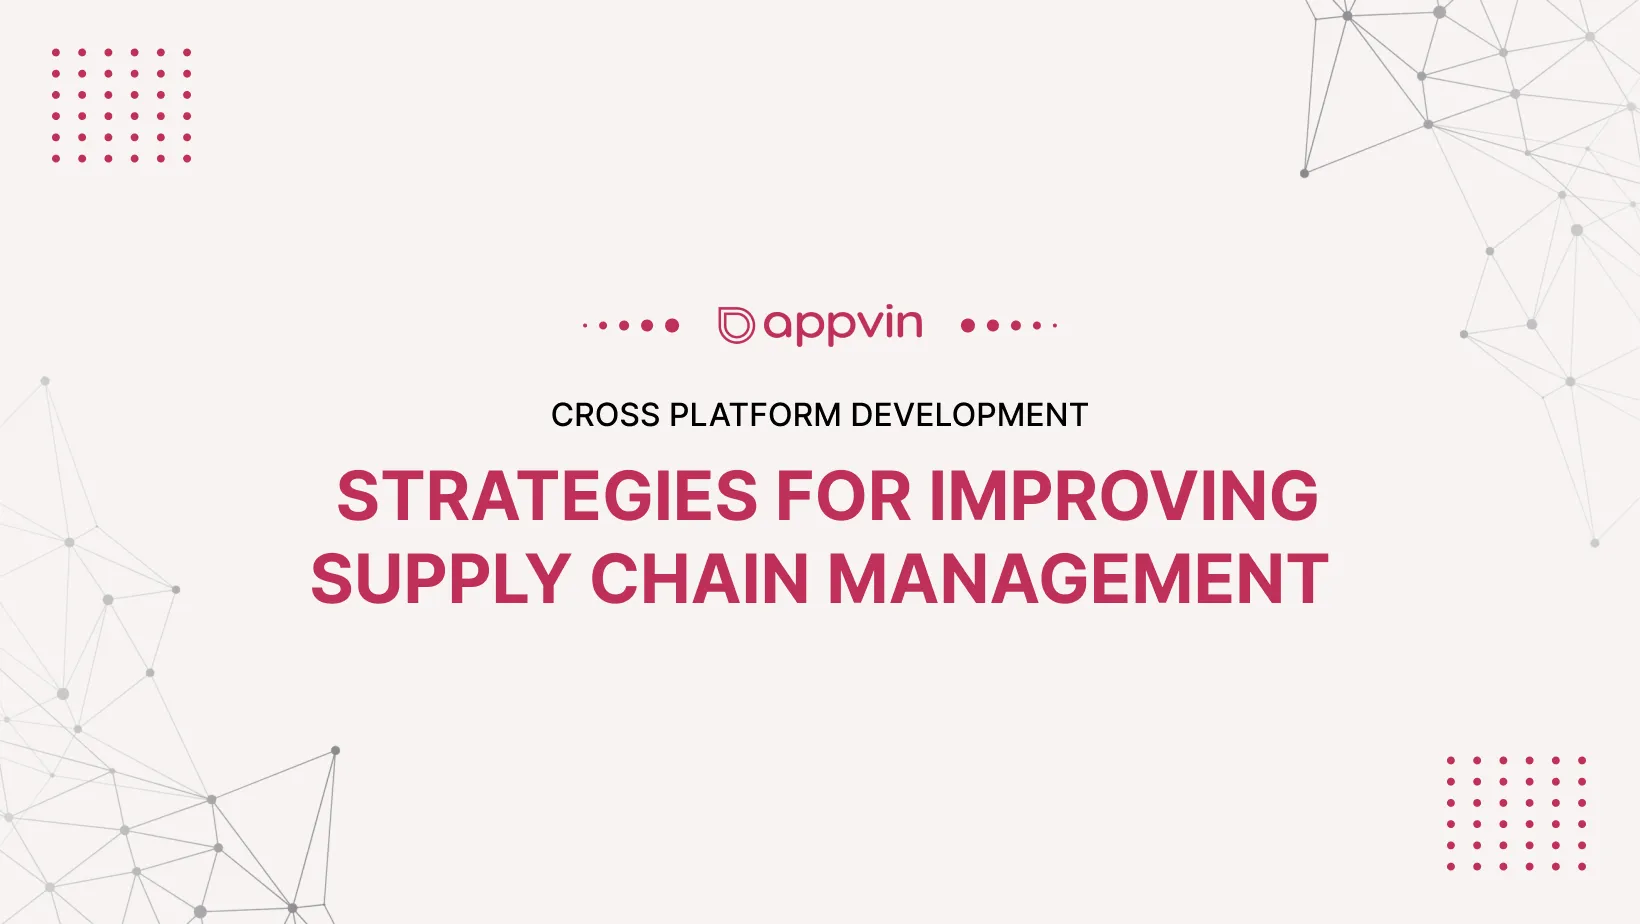 _Strategies for improving supply chain management